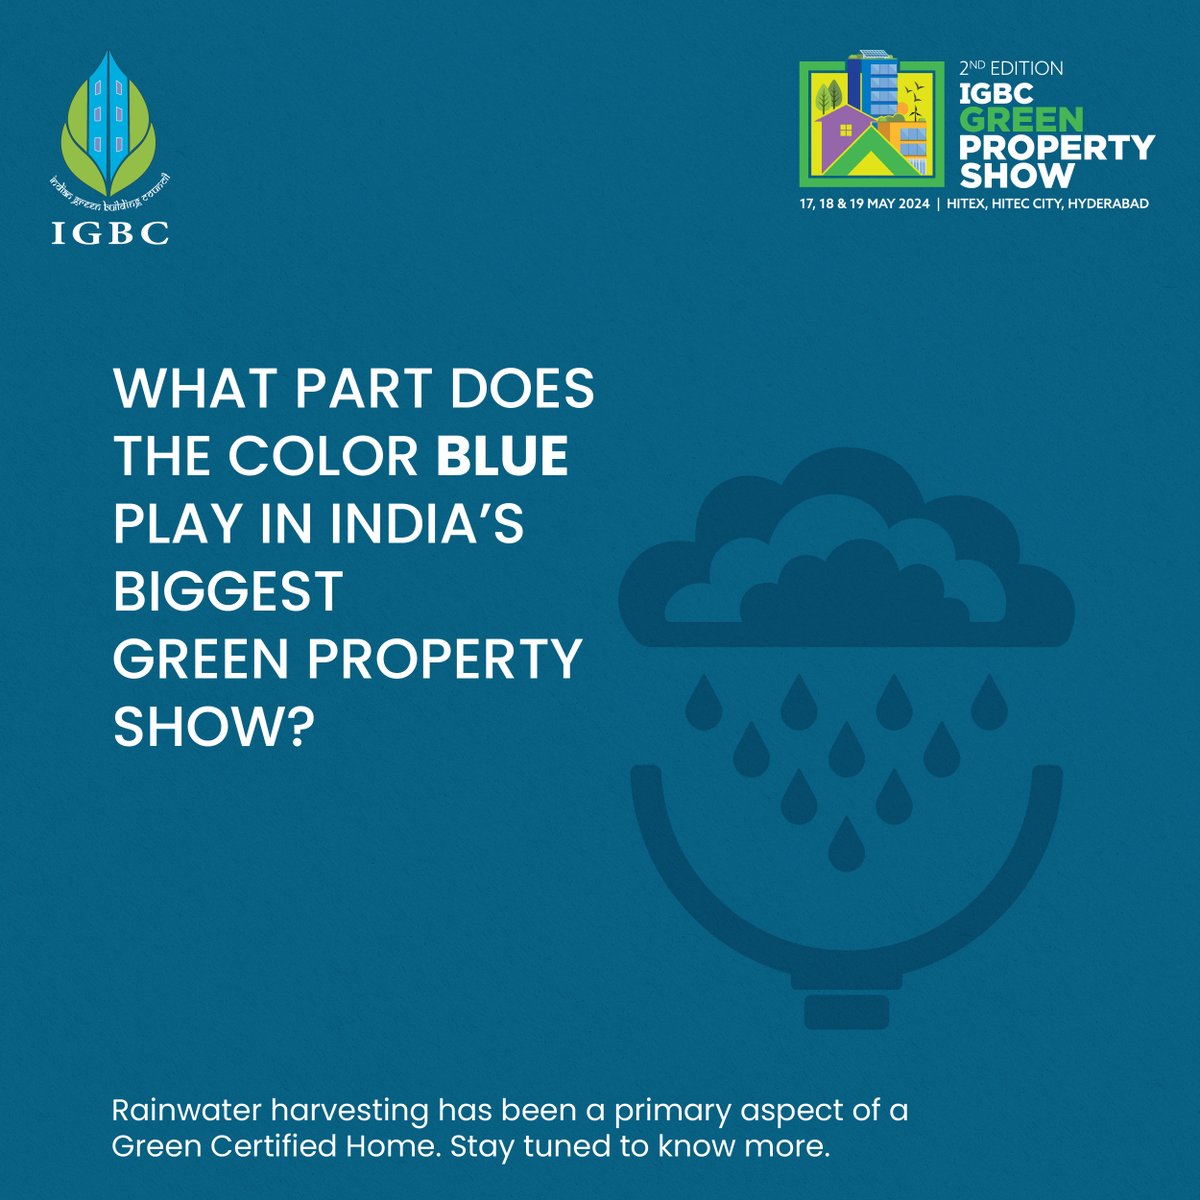 💧Celebrating World Water Day with a focus on water conservation

IGBC GPS24 sets a precedent eco-friendly construction practices like rainwater harvesting, using recycled water in landscaped areas, and more

Learn more - greenpropertyshow.com/index.php

@FollowCII @WorldGBC 

#igbc #cii